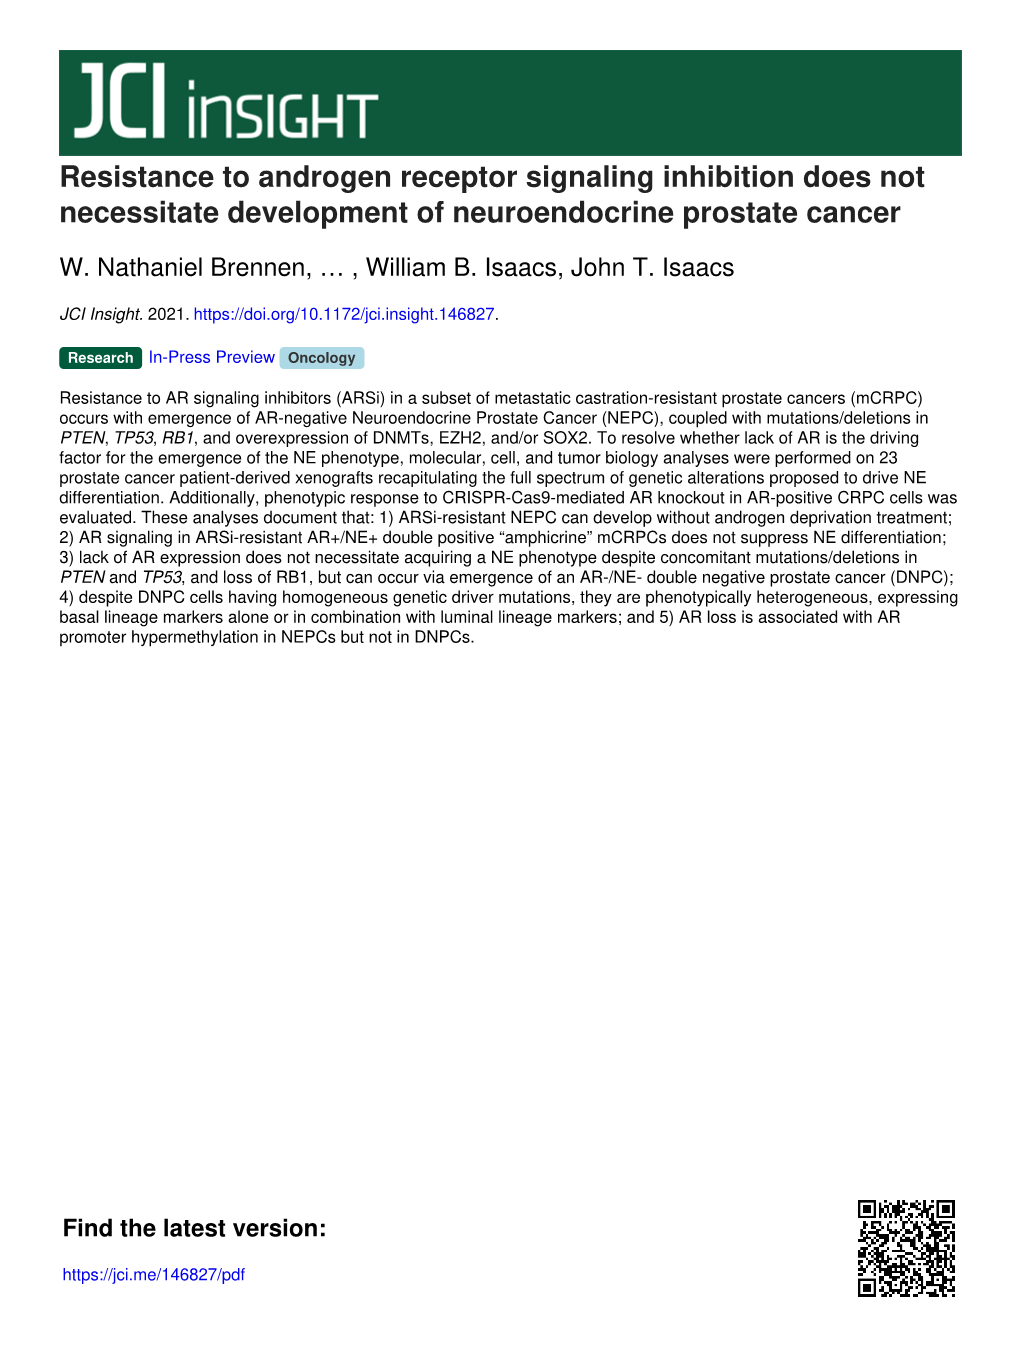 Resistance to Androgen Receptor Signaling Inhibition Does Not Necessitate Development of Neuroendocrine Prostate Cancer